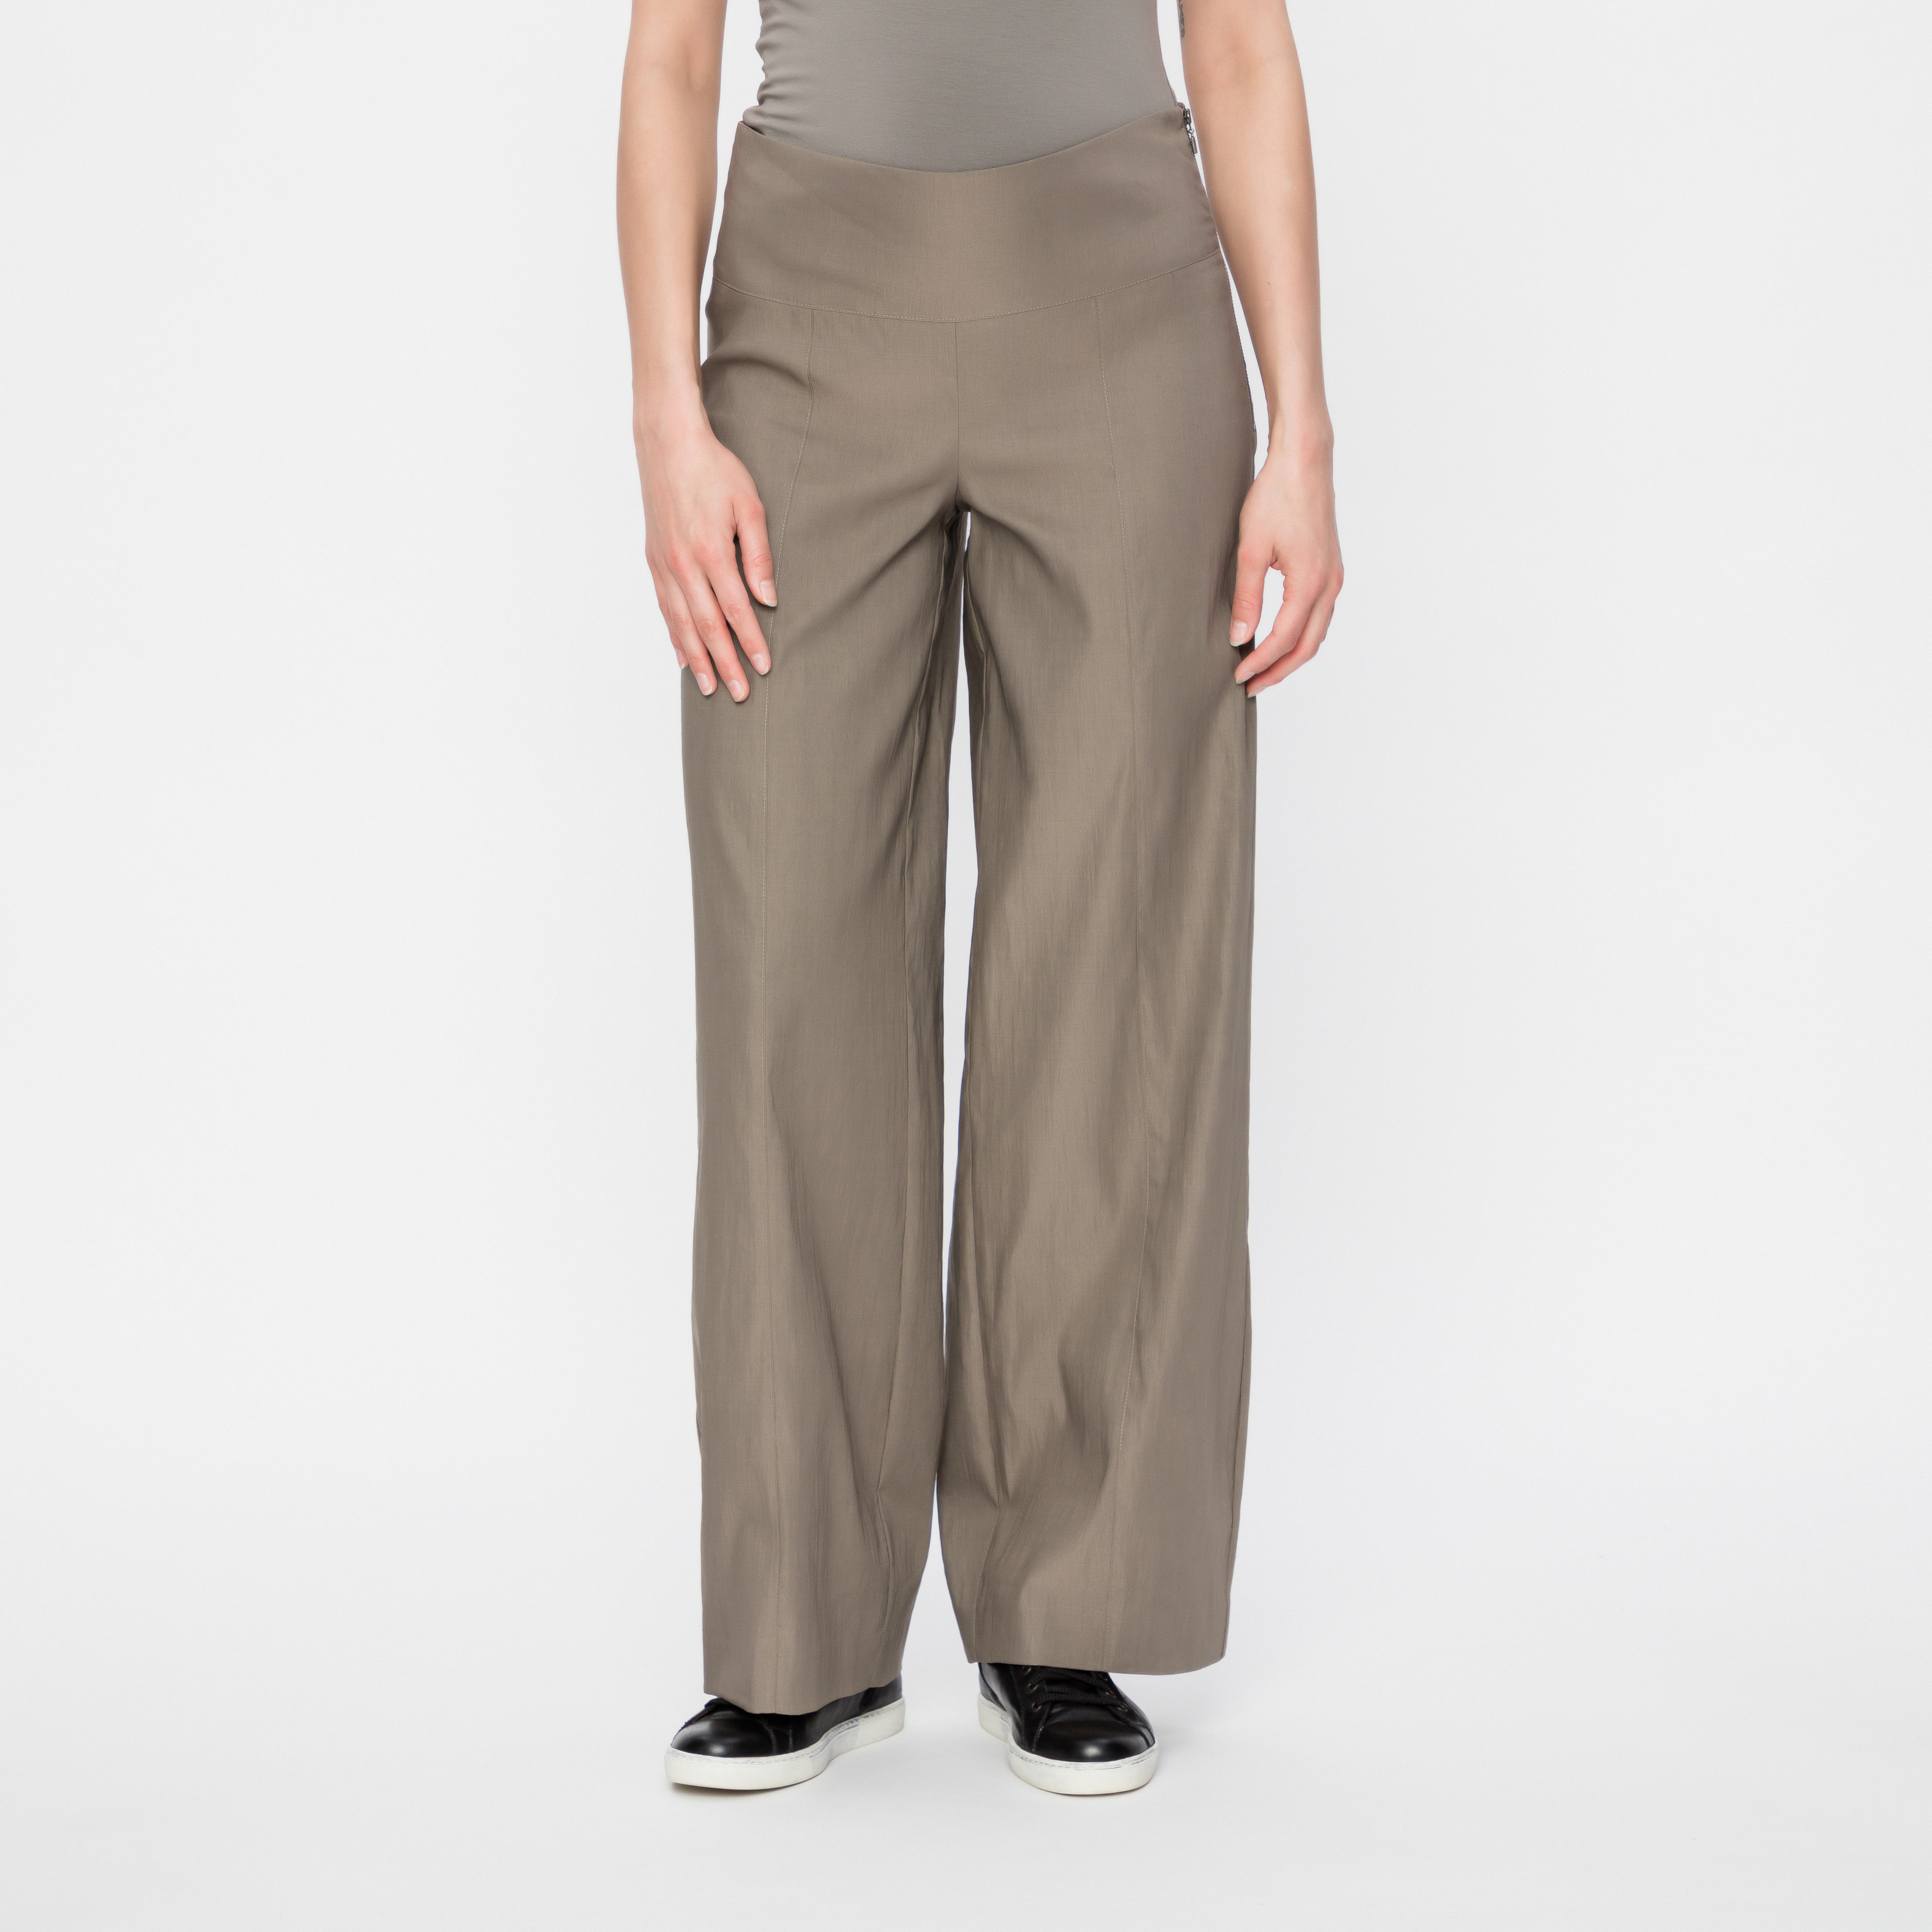 MINNESOTA PANTS IN LIGHT STRETCH LINEN AND COTTON DEIM - CORAL